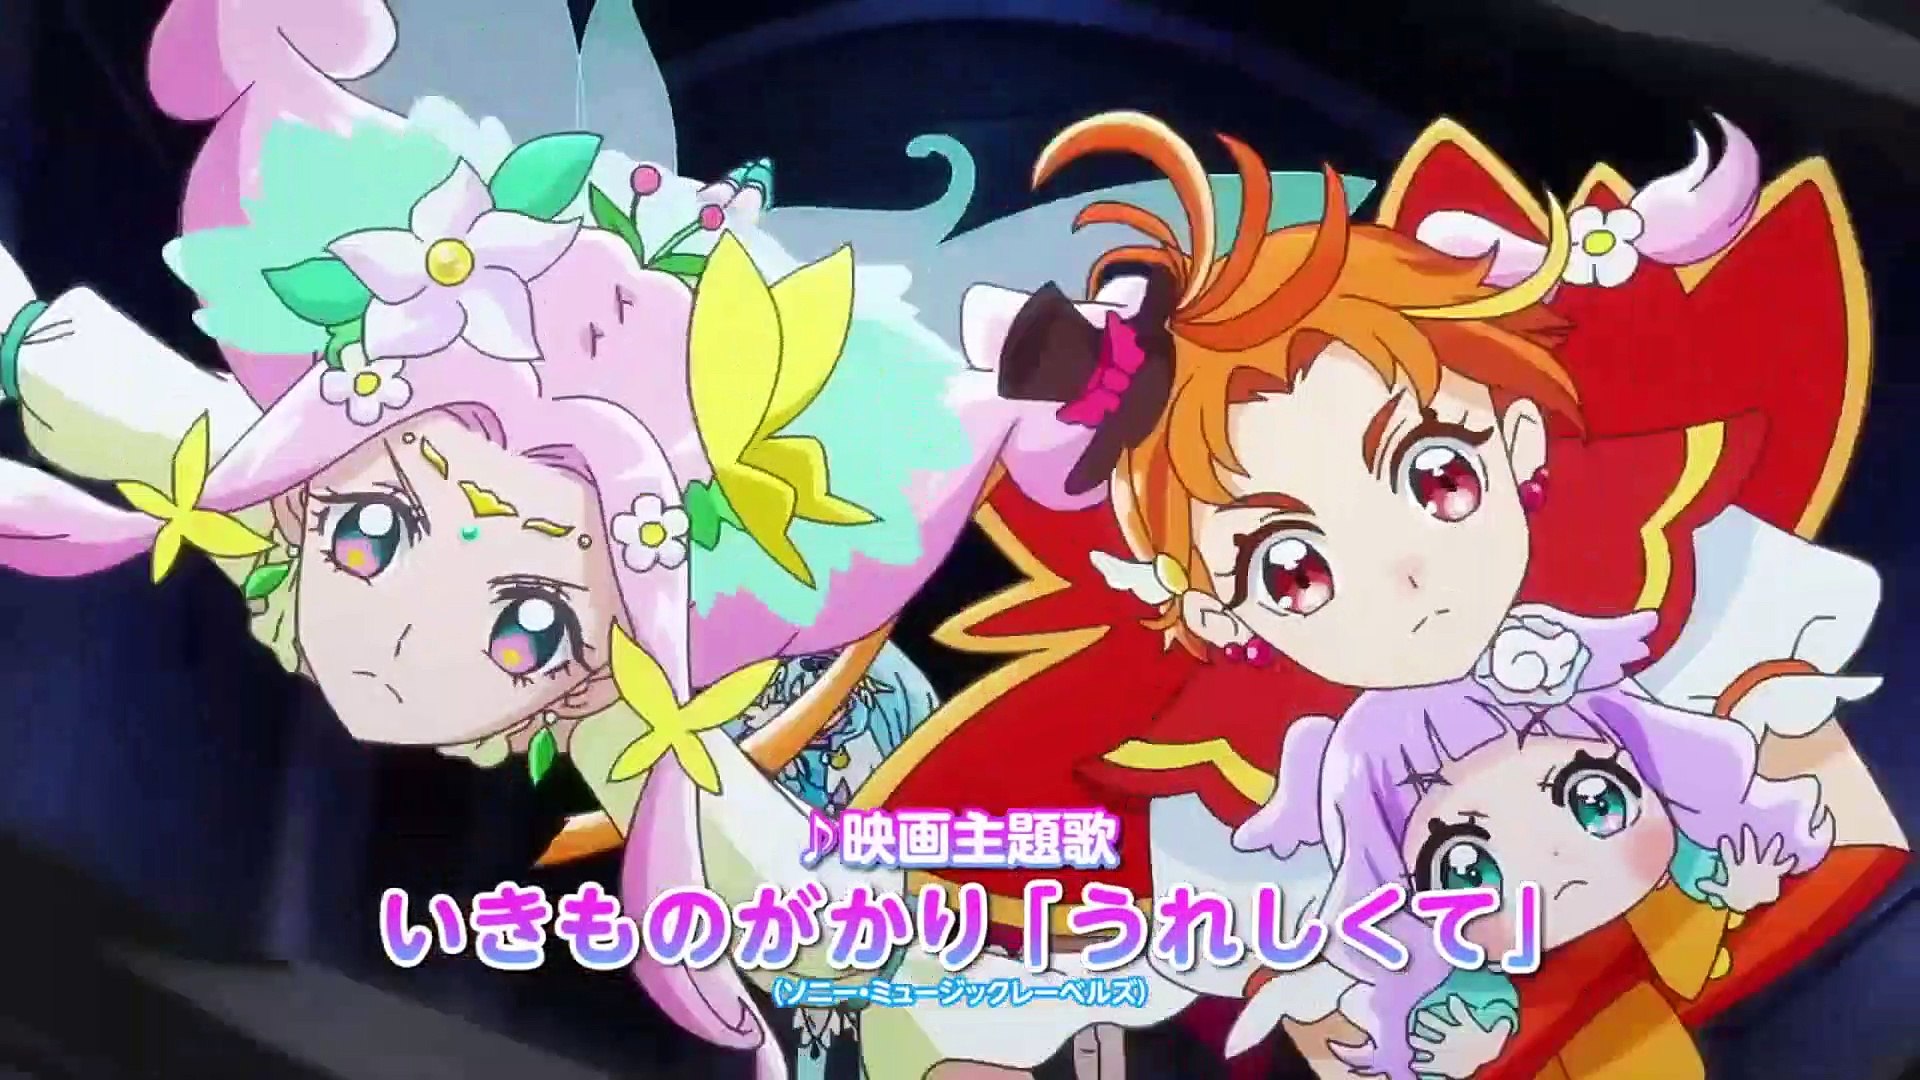 Precure All Stars F Film Releases 2 Action-Packed New Clips - Crunchyroll  News